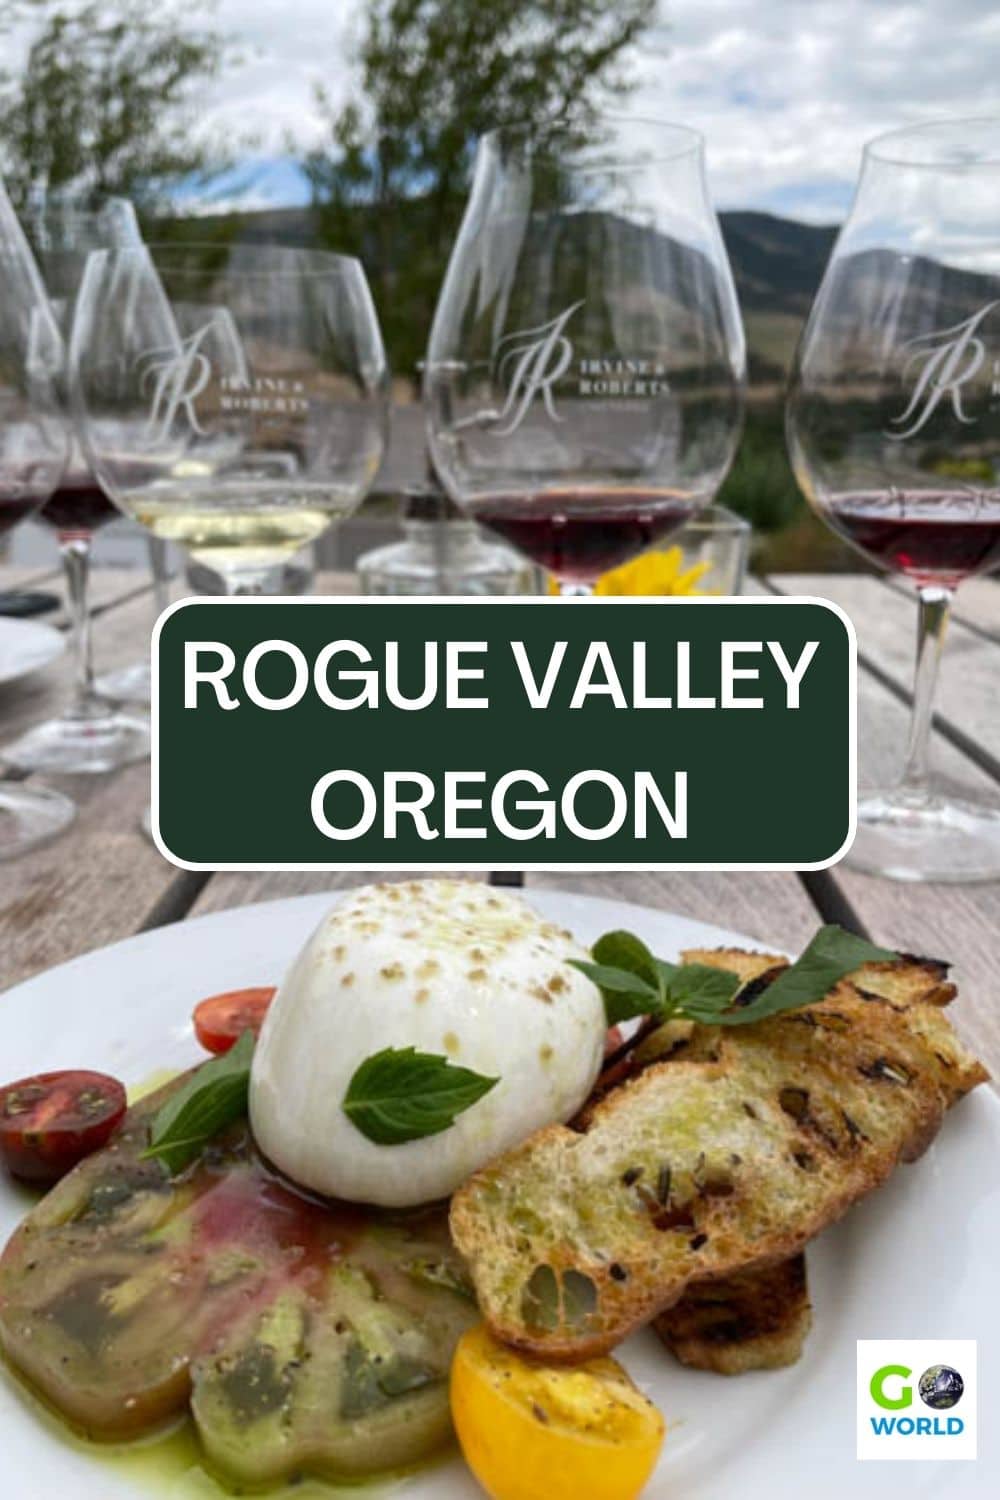 Fall in love with Rogue Valley, Oregon and all its natural beauty, outdoor activities, vibrant arts scene plus world-class wineries and food. #oregon #roguevalleyoregon #oregonwine